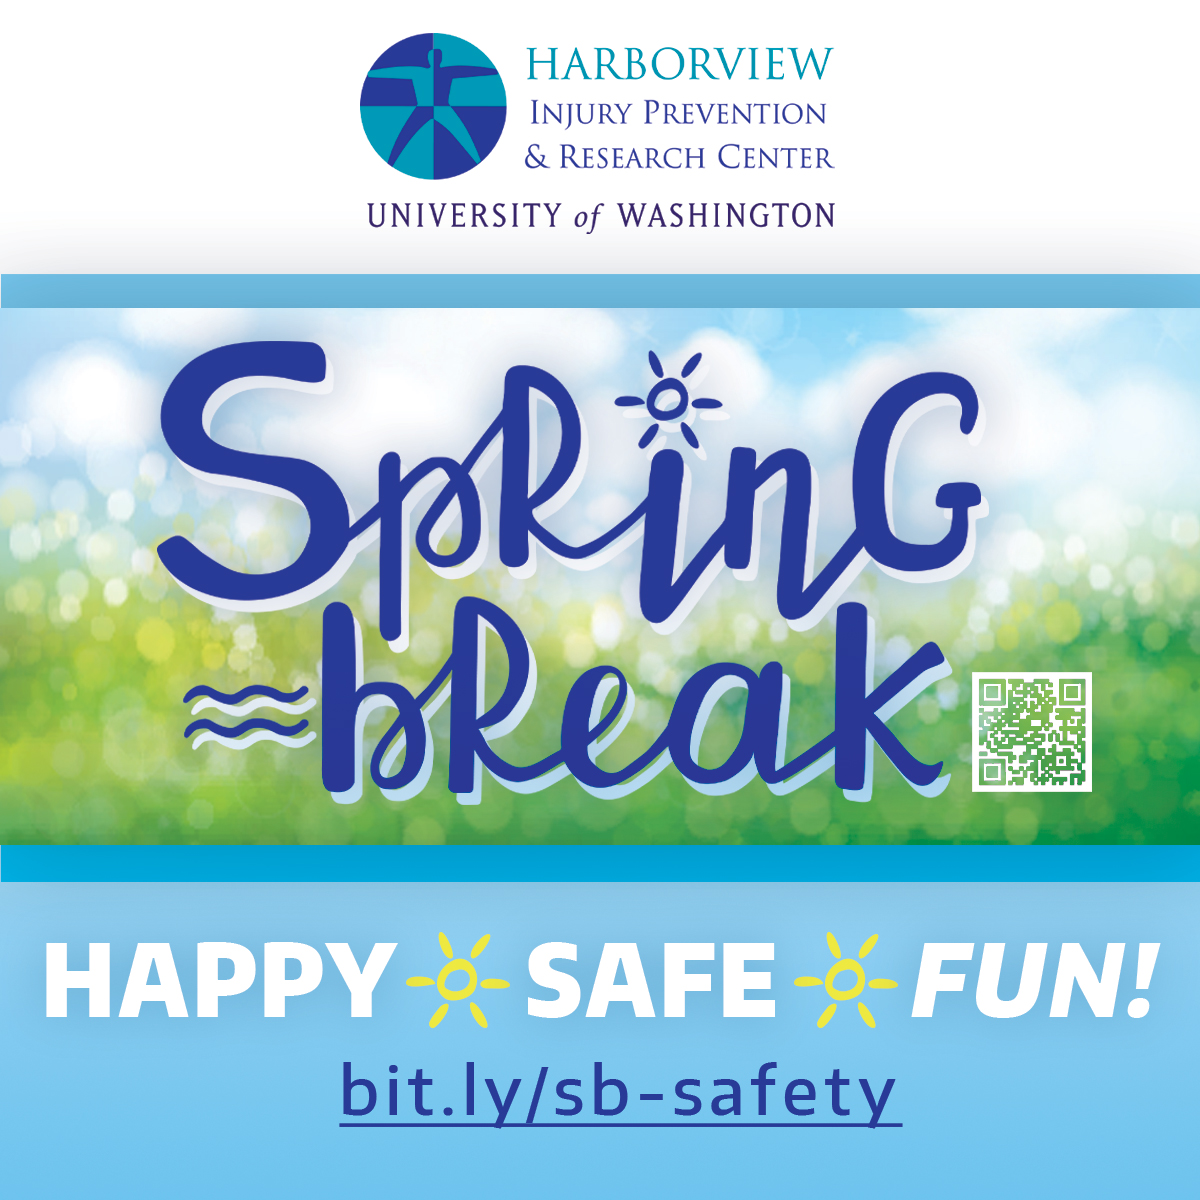 This #SpringBreak, #Stopdrowning BEFORE it starts: 1️⃣ Never swim alone 🏊🏻 2️⃣ Supervise kids 👦🏼👶🏽👧🏿 3️⃣ Learn #CPR ❤️ 4️⃣ Wear life jackets 🦺 Learn more: hiprc.org/spring-break-s… 💧🌊 #Spreadtheword #SaveLives #DrowningPrevention #SpringBreakSafety